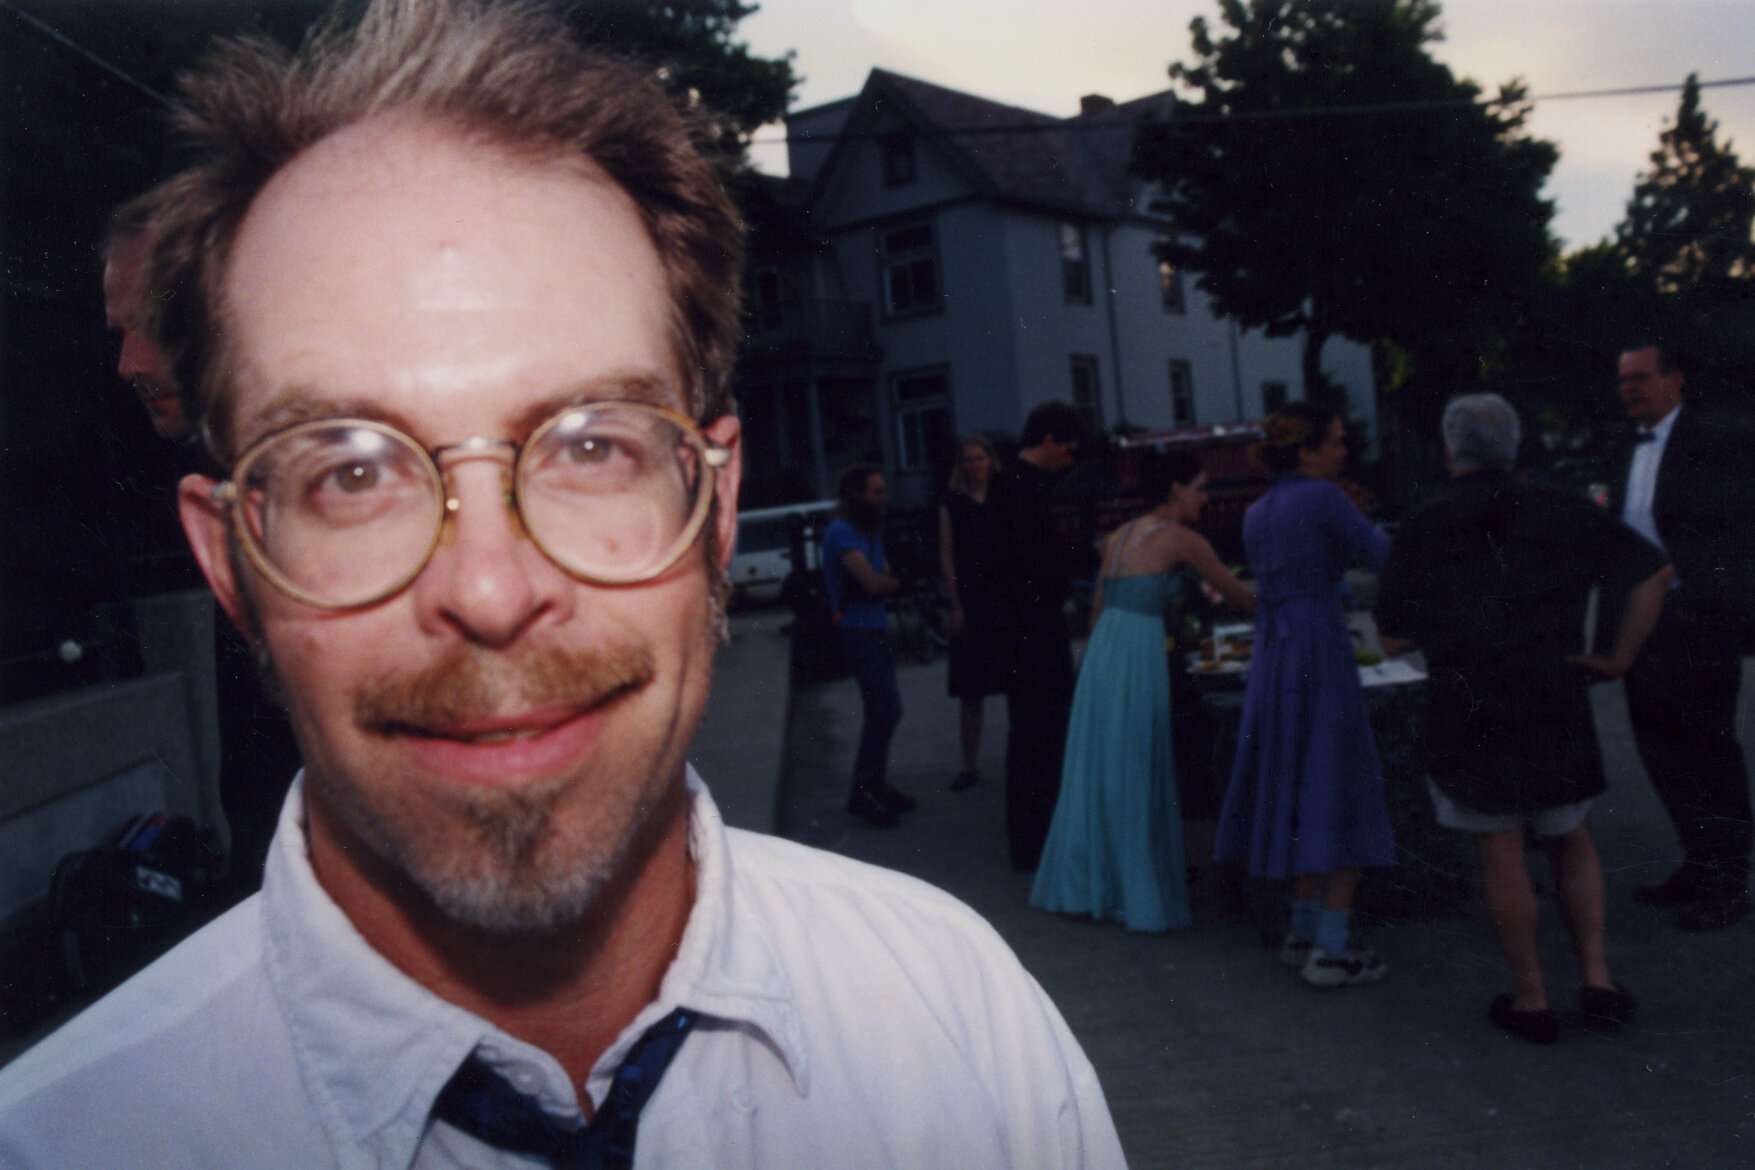 Man in white shirt with dark tie, large round glasses, and brown hair smiles into camera.